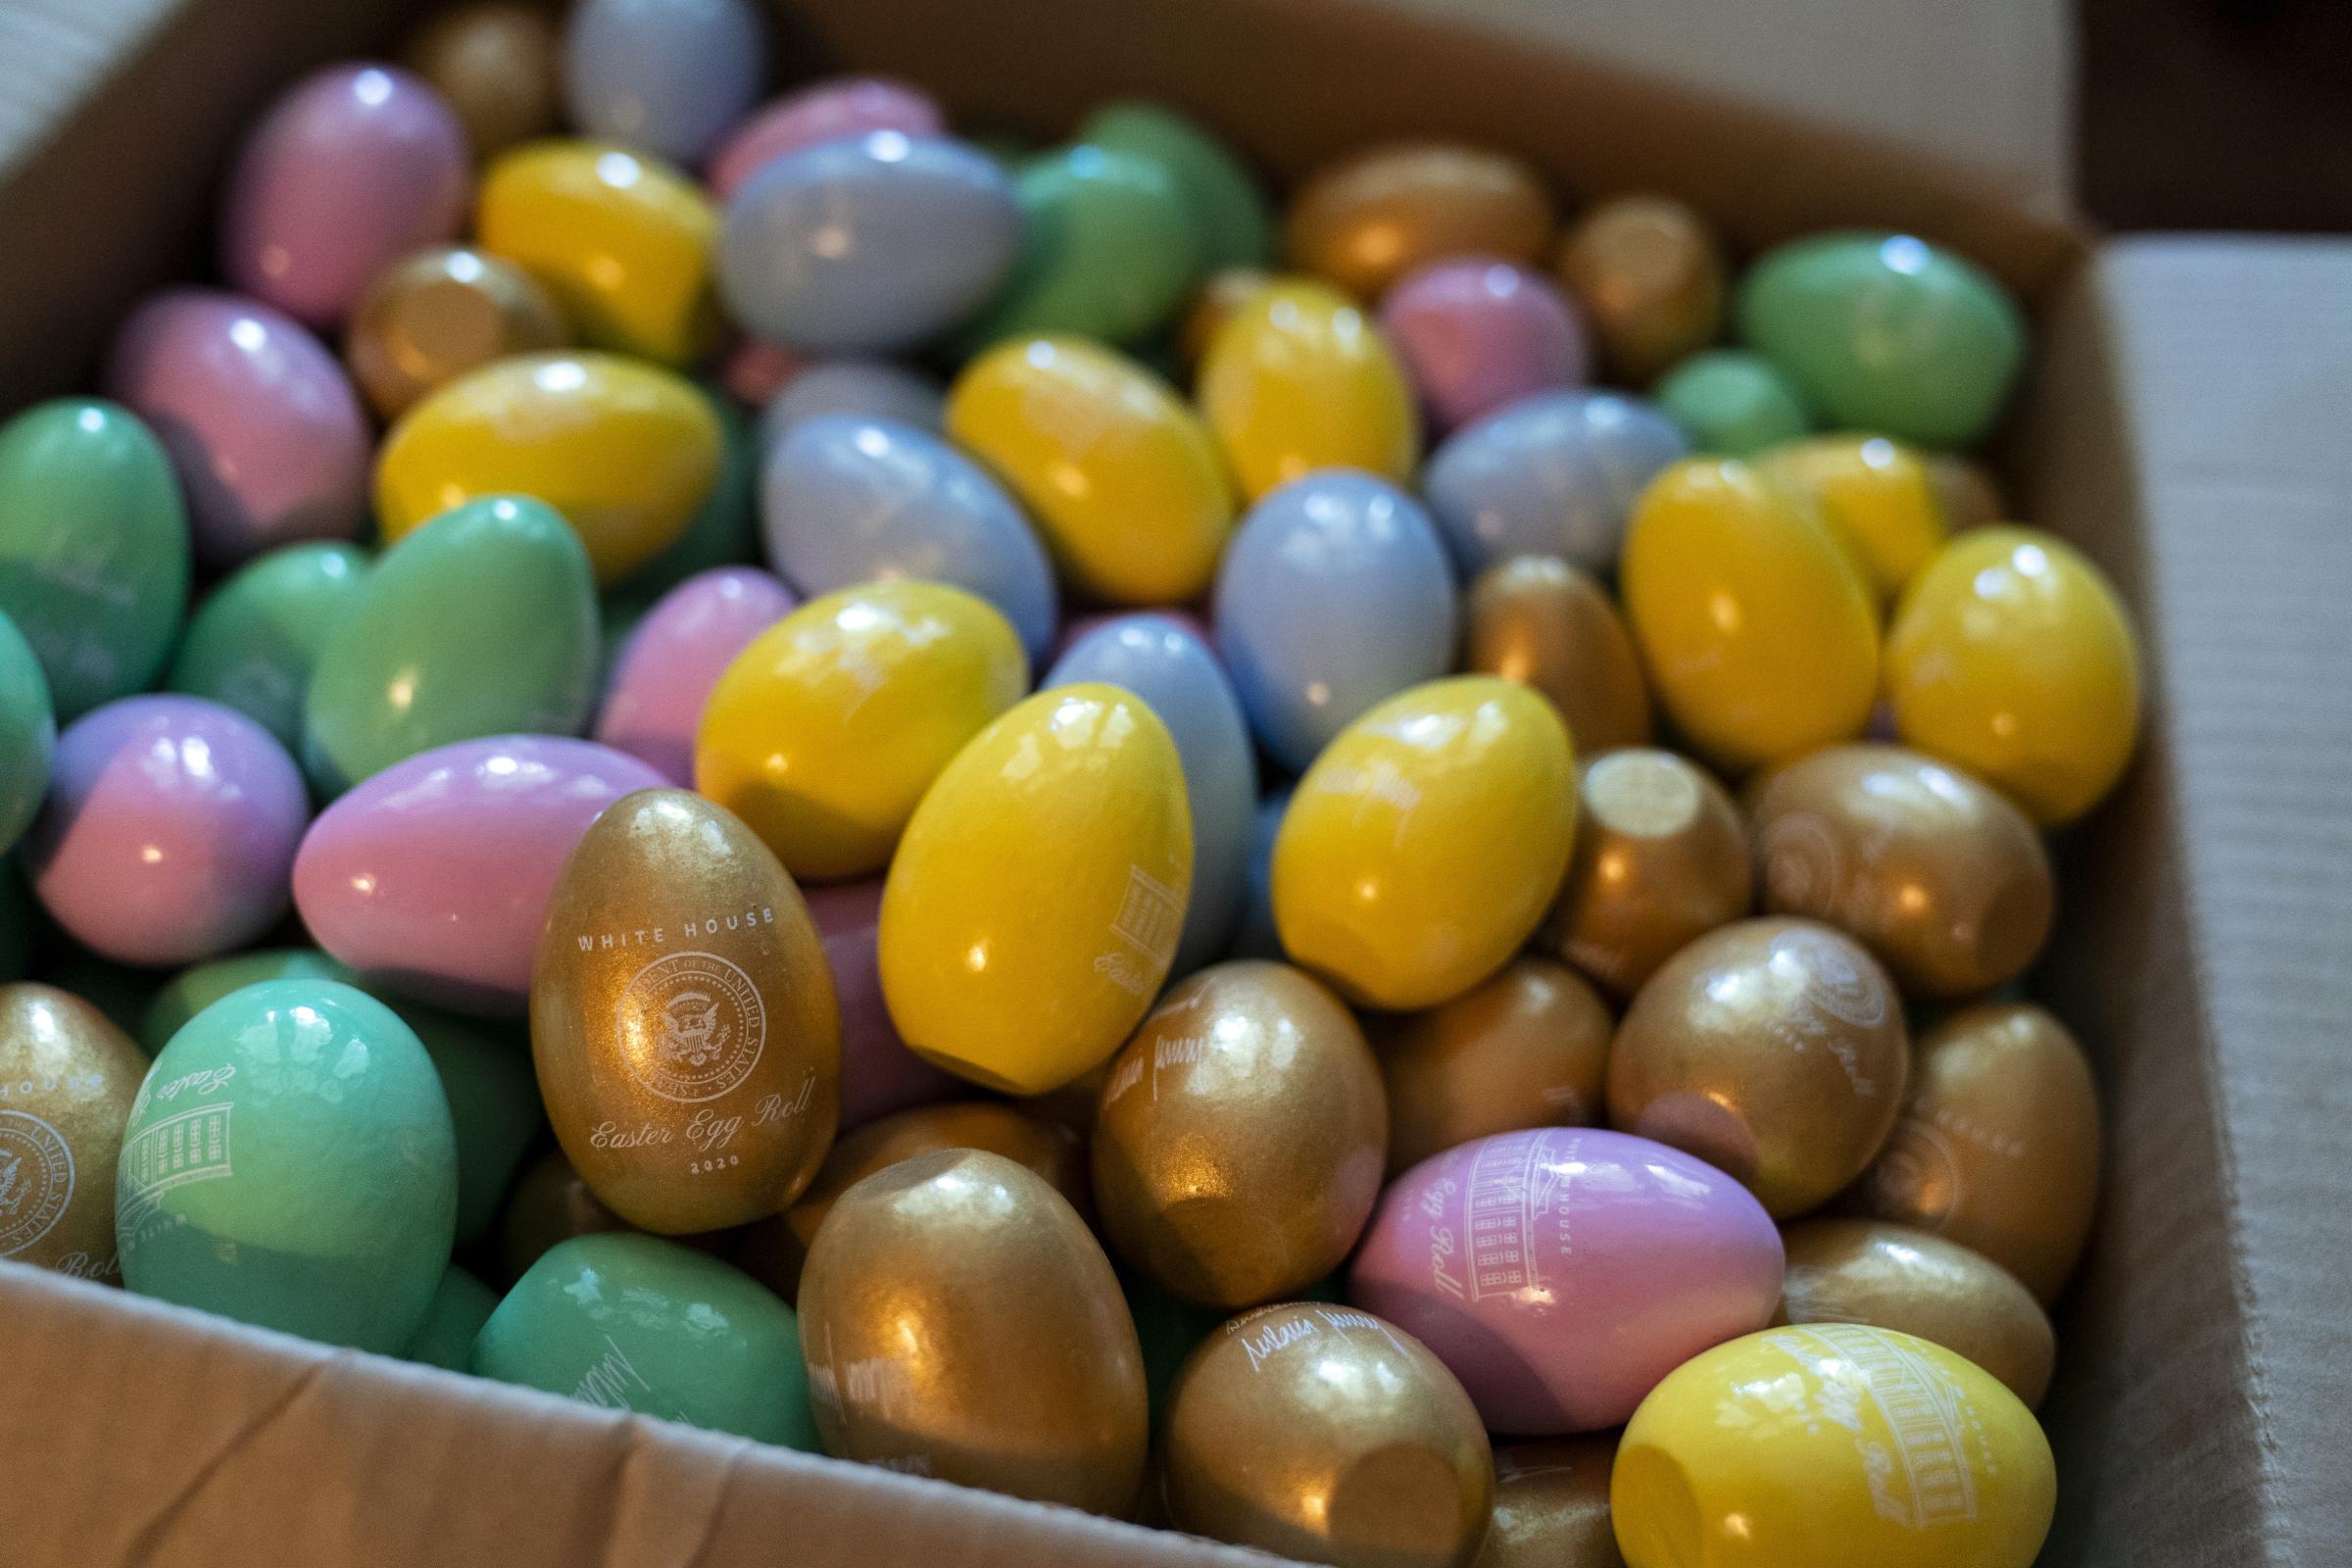 People Are Making Creme Eggs At Home For Easter Using This Four Ingredient Recipe From A Chocolatier Glbnews Com - roblox egg hunt 2020 all games id list for finding easter egg avatar hats daily star